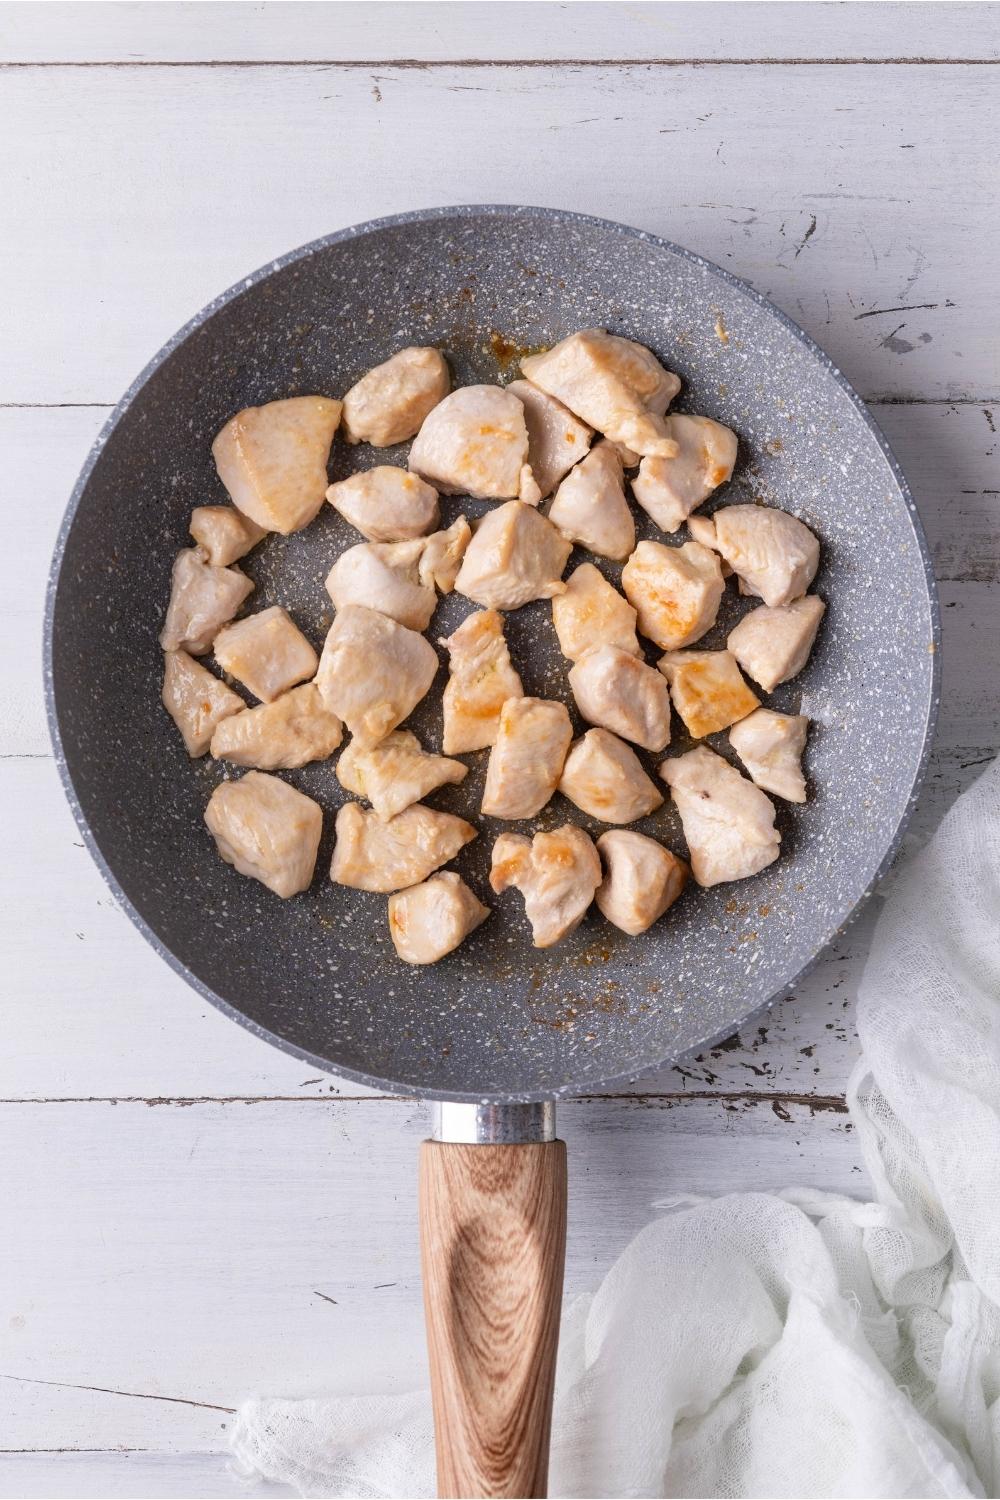 Skillet with cooked chicken breast cut into chunks.